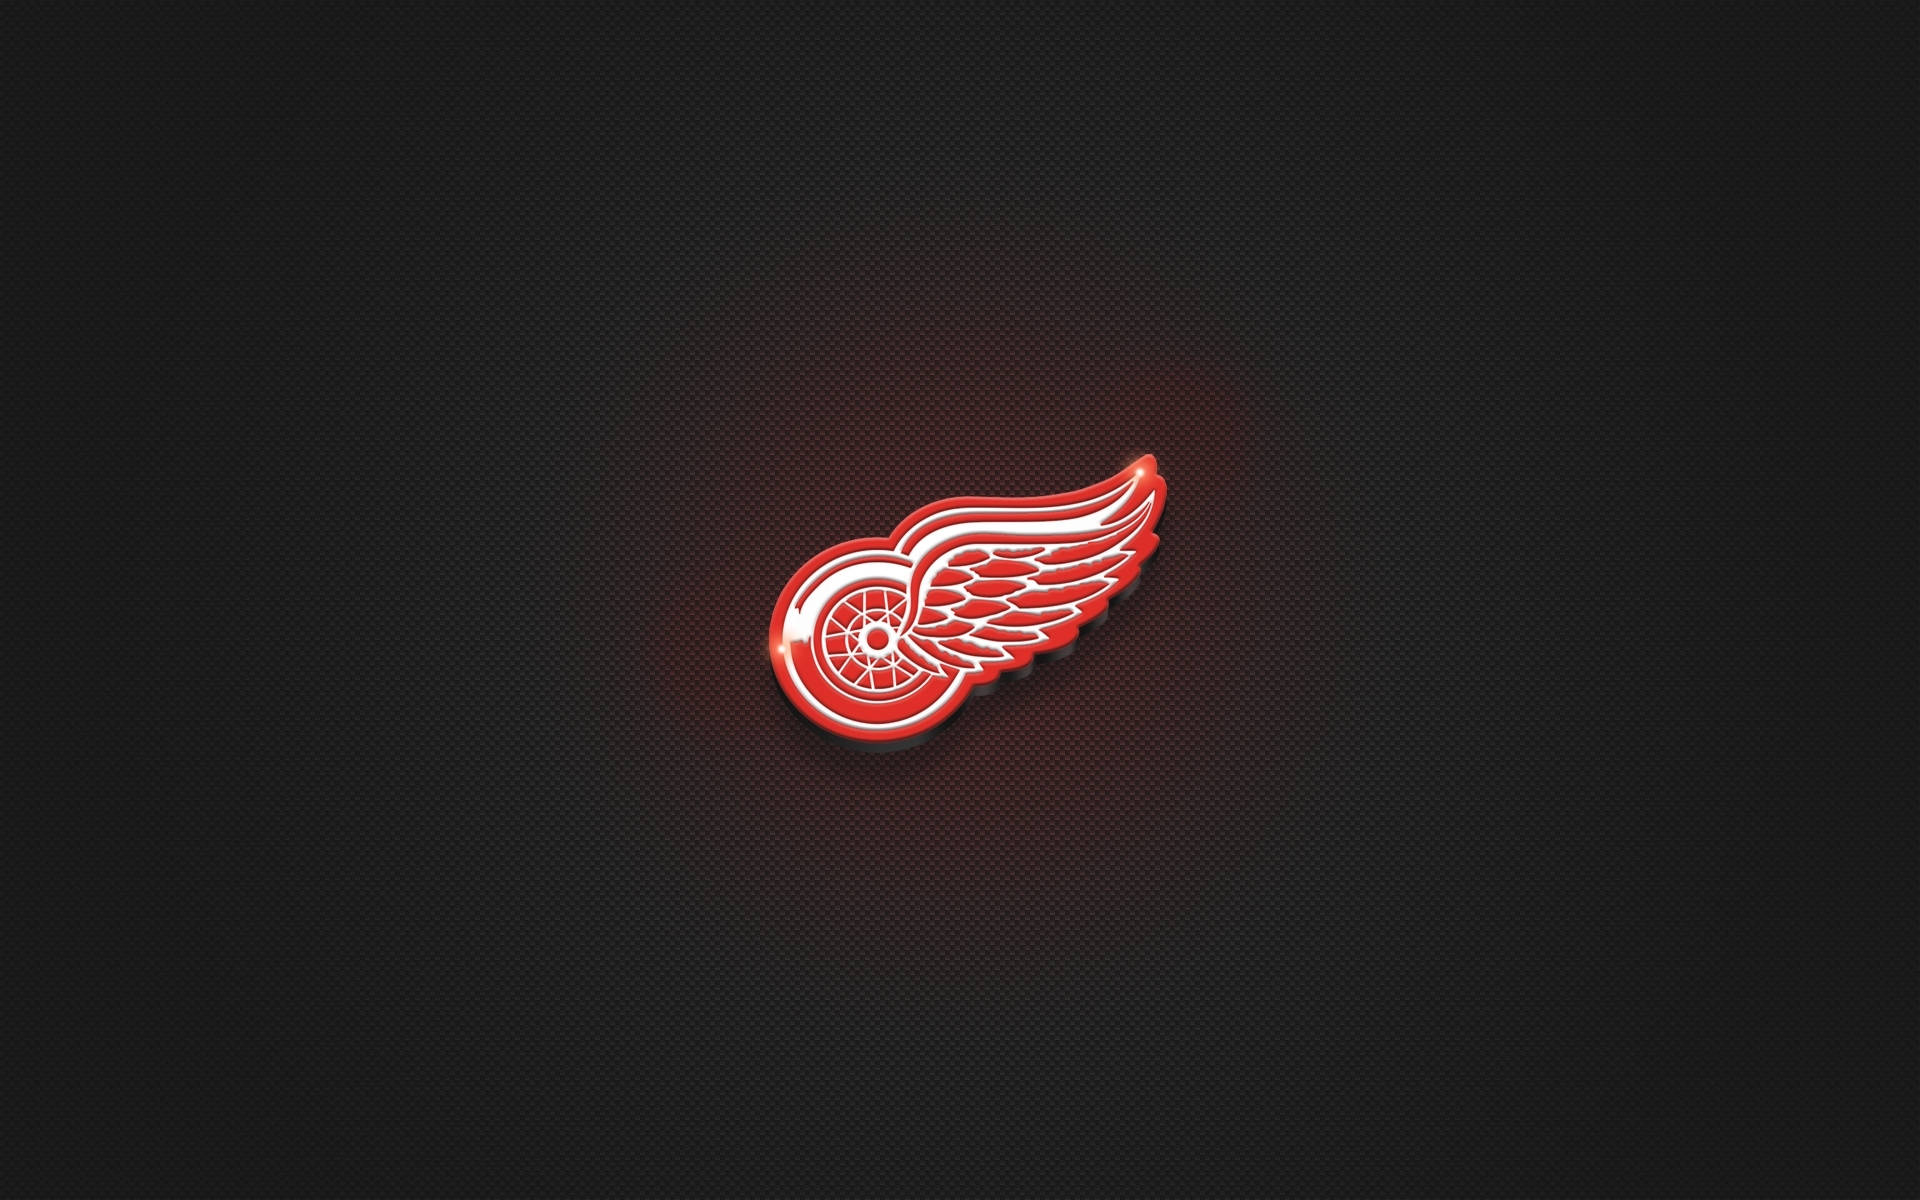 200+] Detroit Red Wings Wallpapers